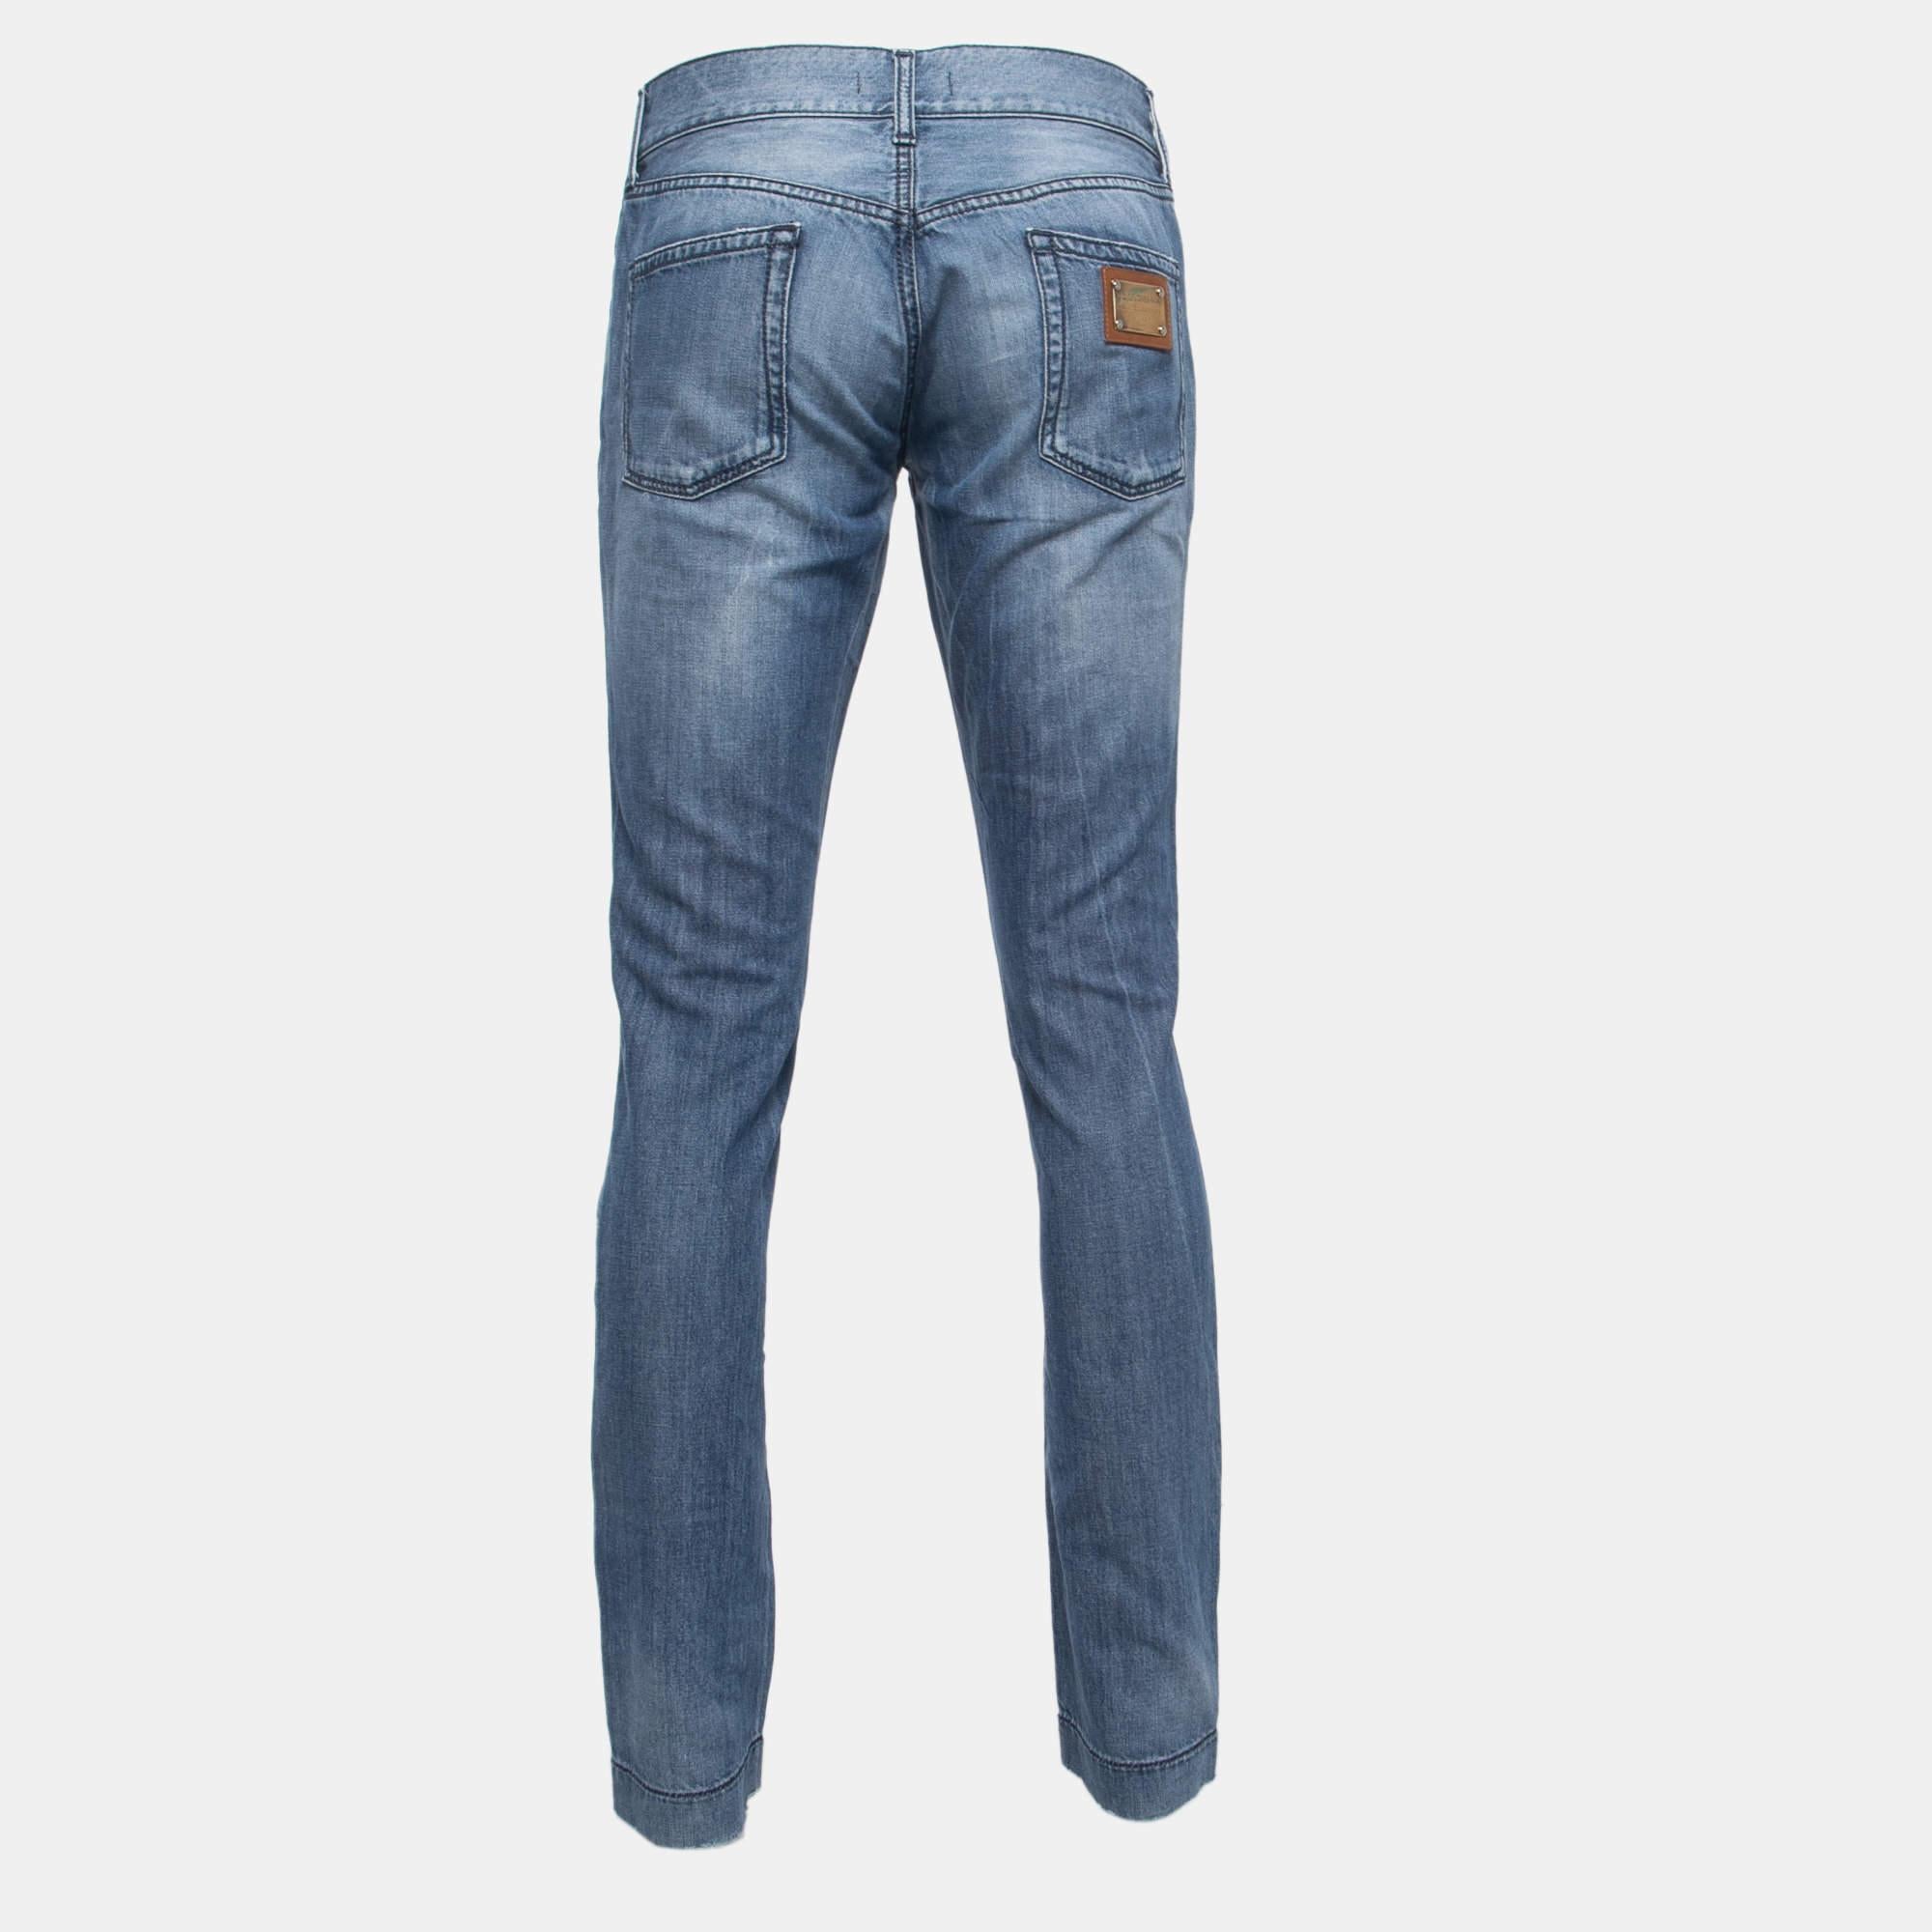 These Dolce & Gabbana jeans are a must-have wardrobe essential. These blue jeans can be dressed both up and down for looks that are either casual and comfy or chic and fashionable.

